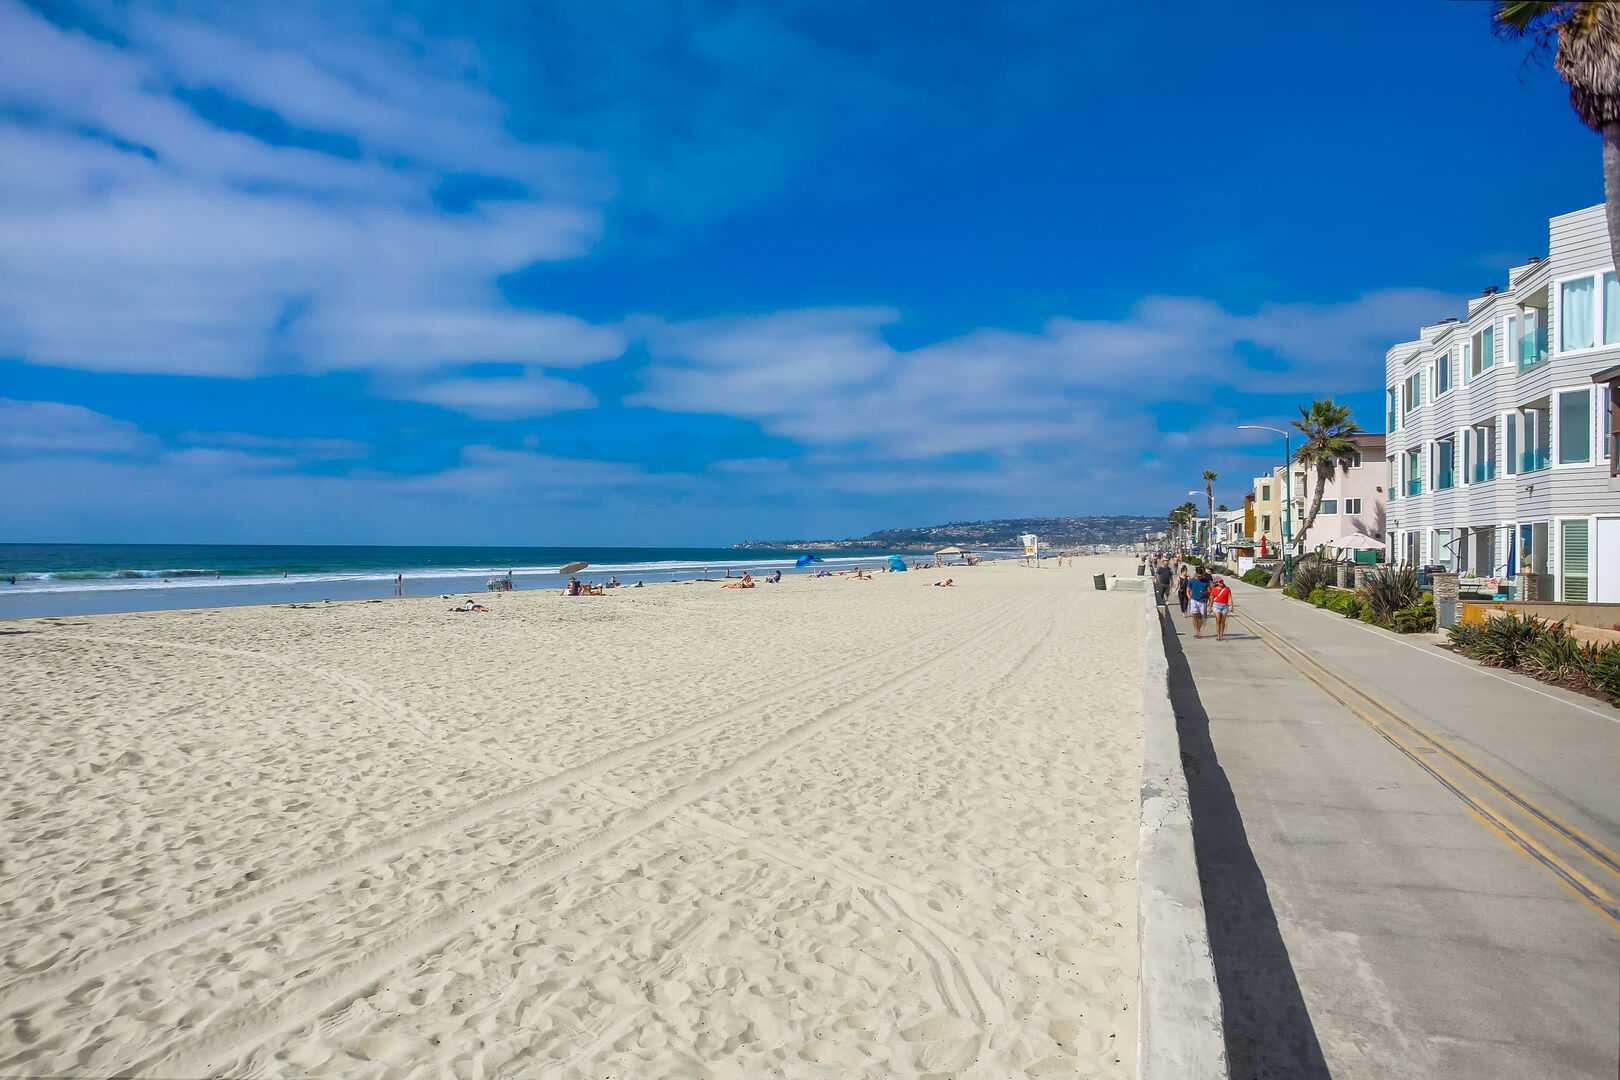 Enjoy the boardwalk and beach with restaurants and shops within walking distance